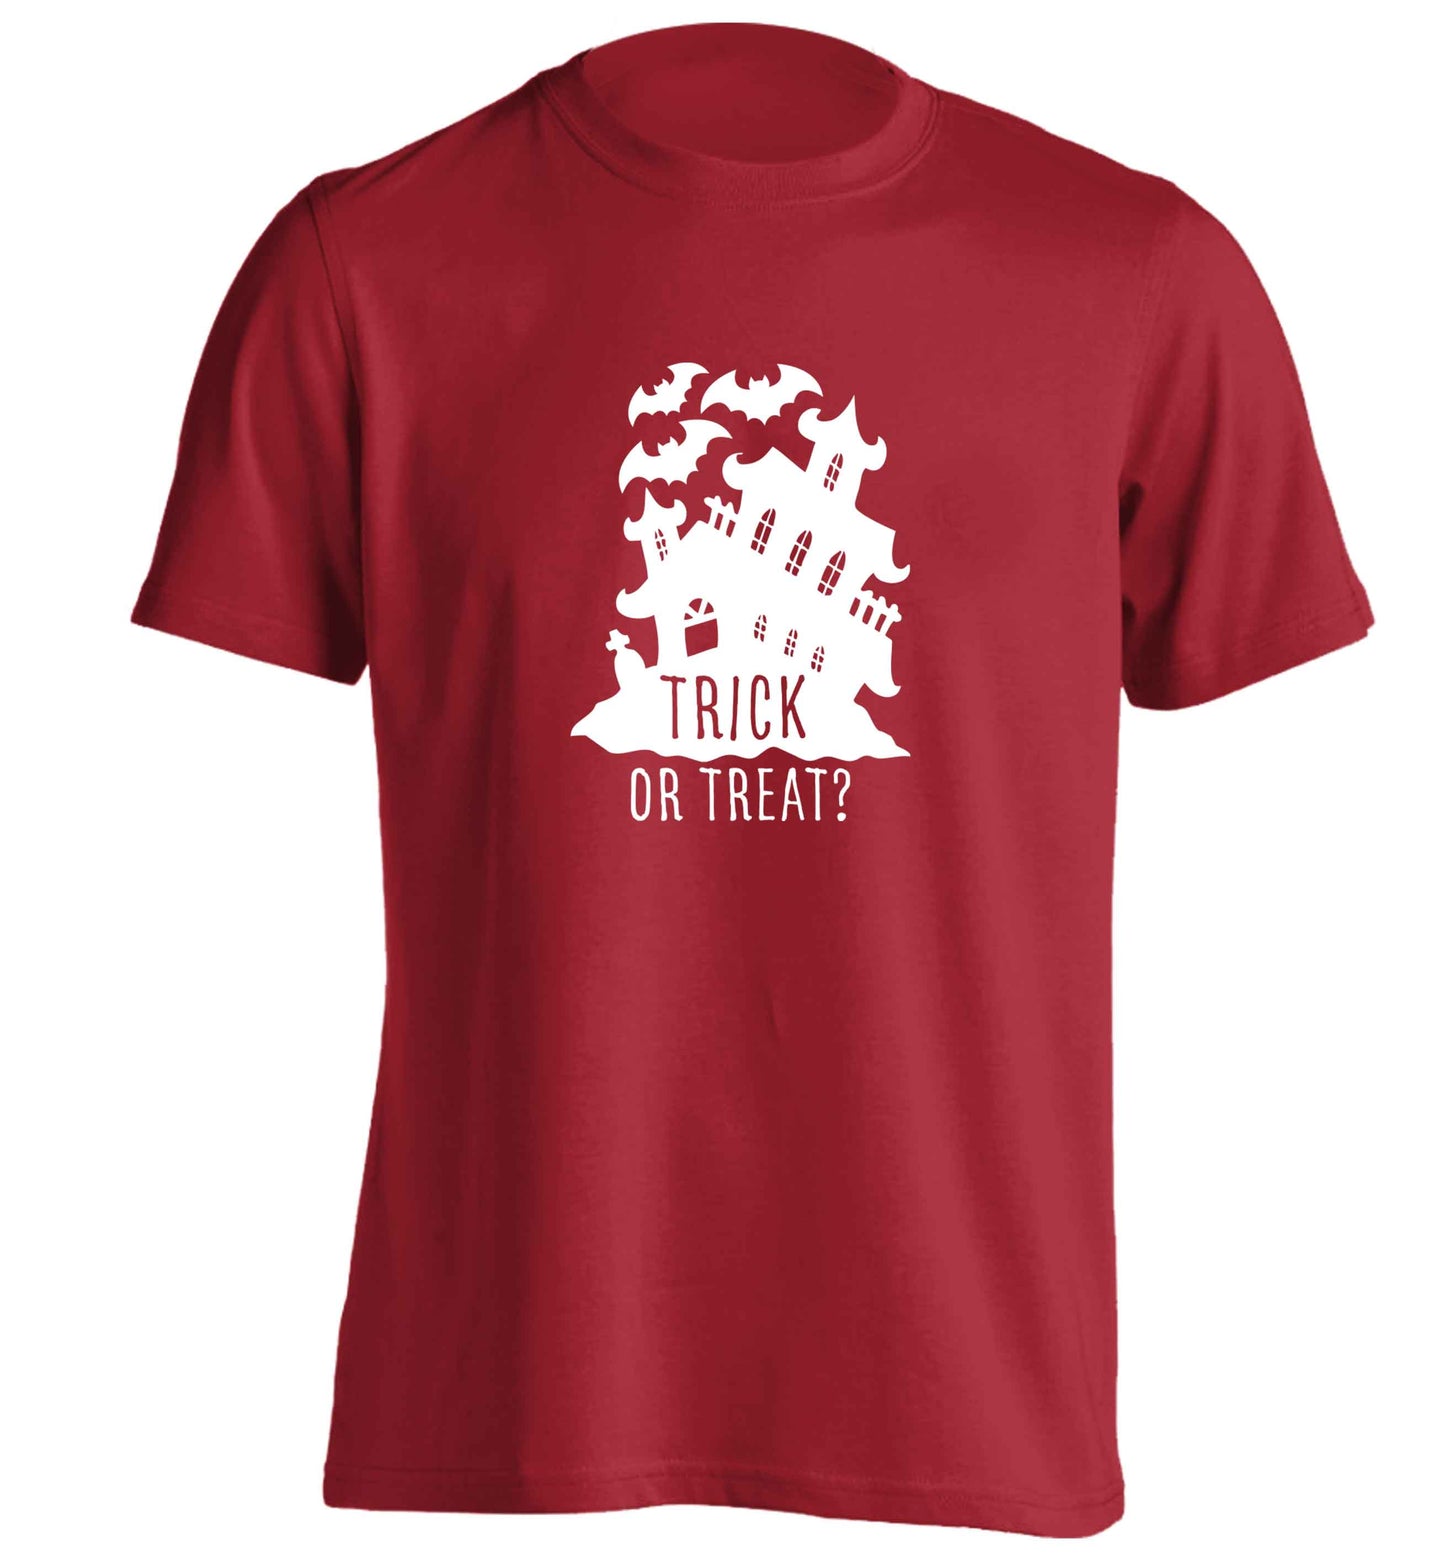 Trick or treat - haunted house adults unisex red Tshirt 2XL